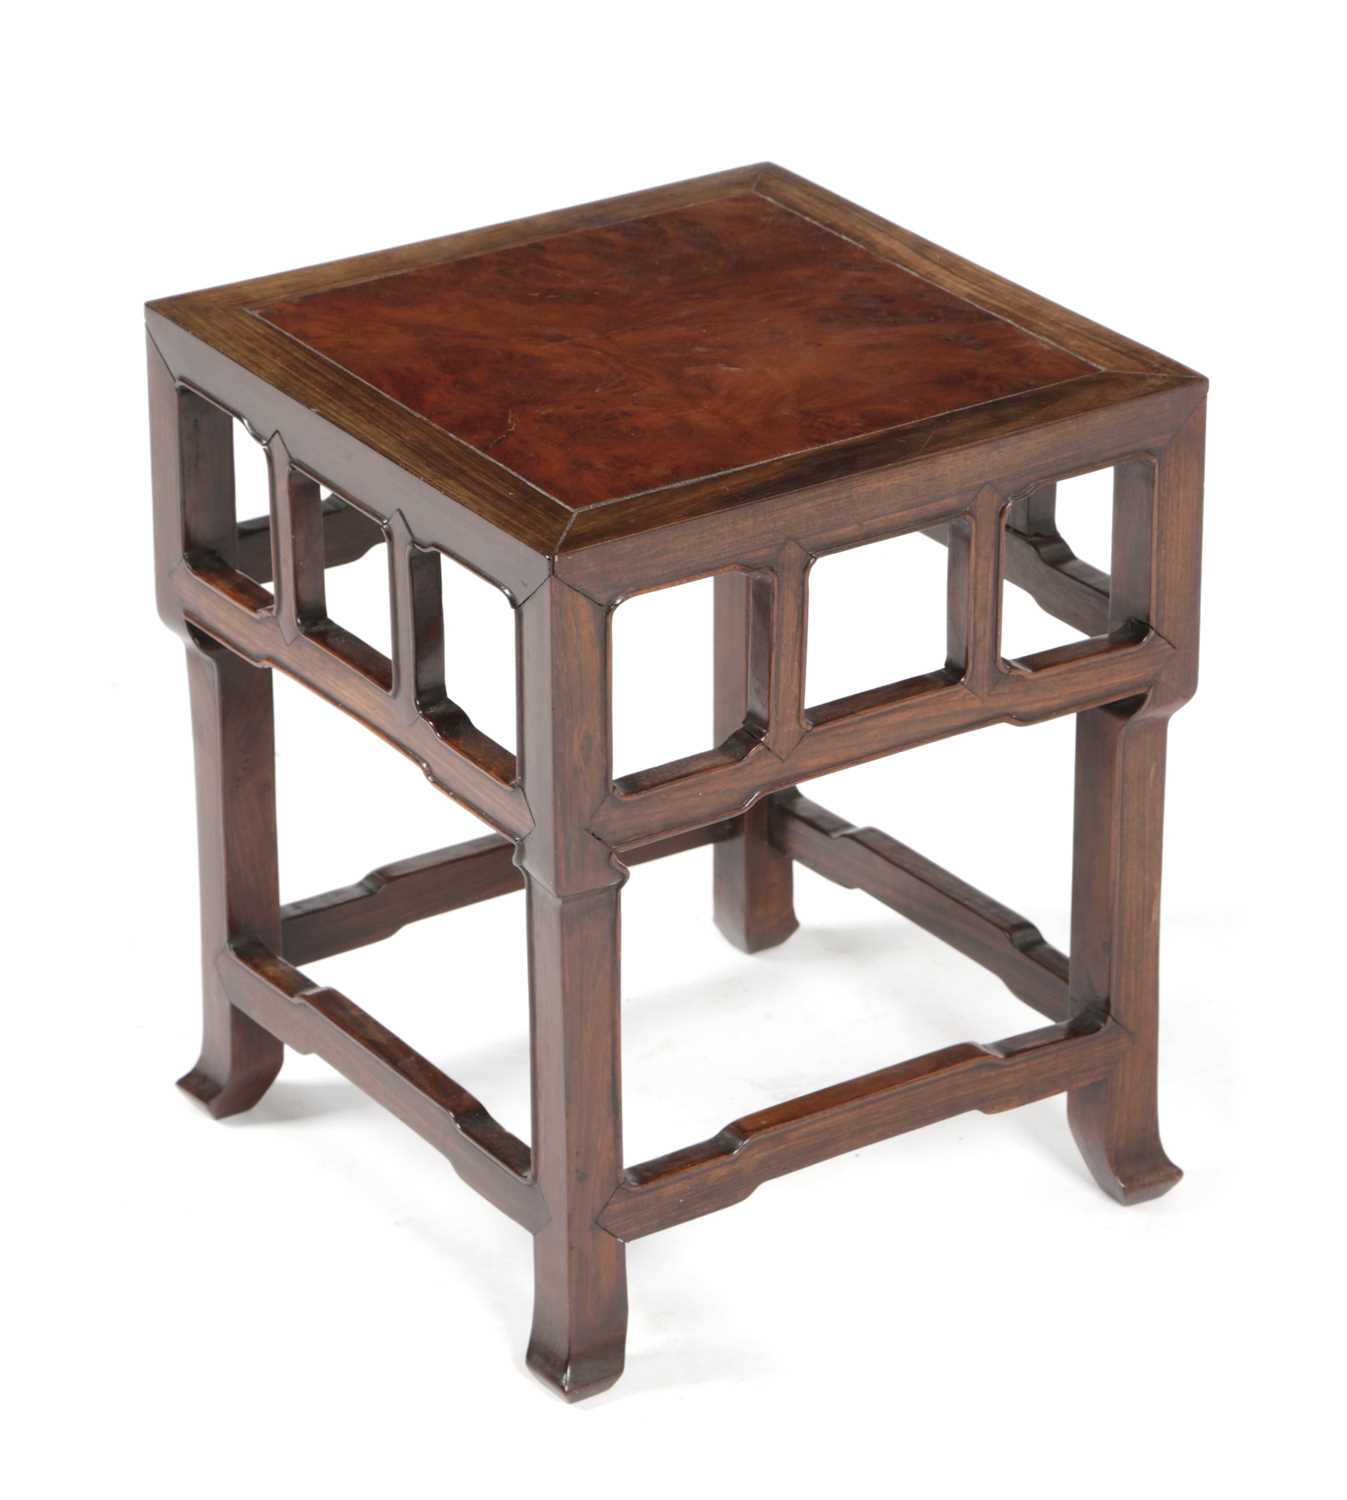 A CHINESE PADOUK STAND OR OCCASIONAL TABLE 19TH CENTURY of square section, the top inset with an